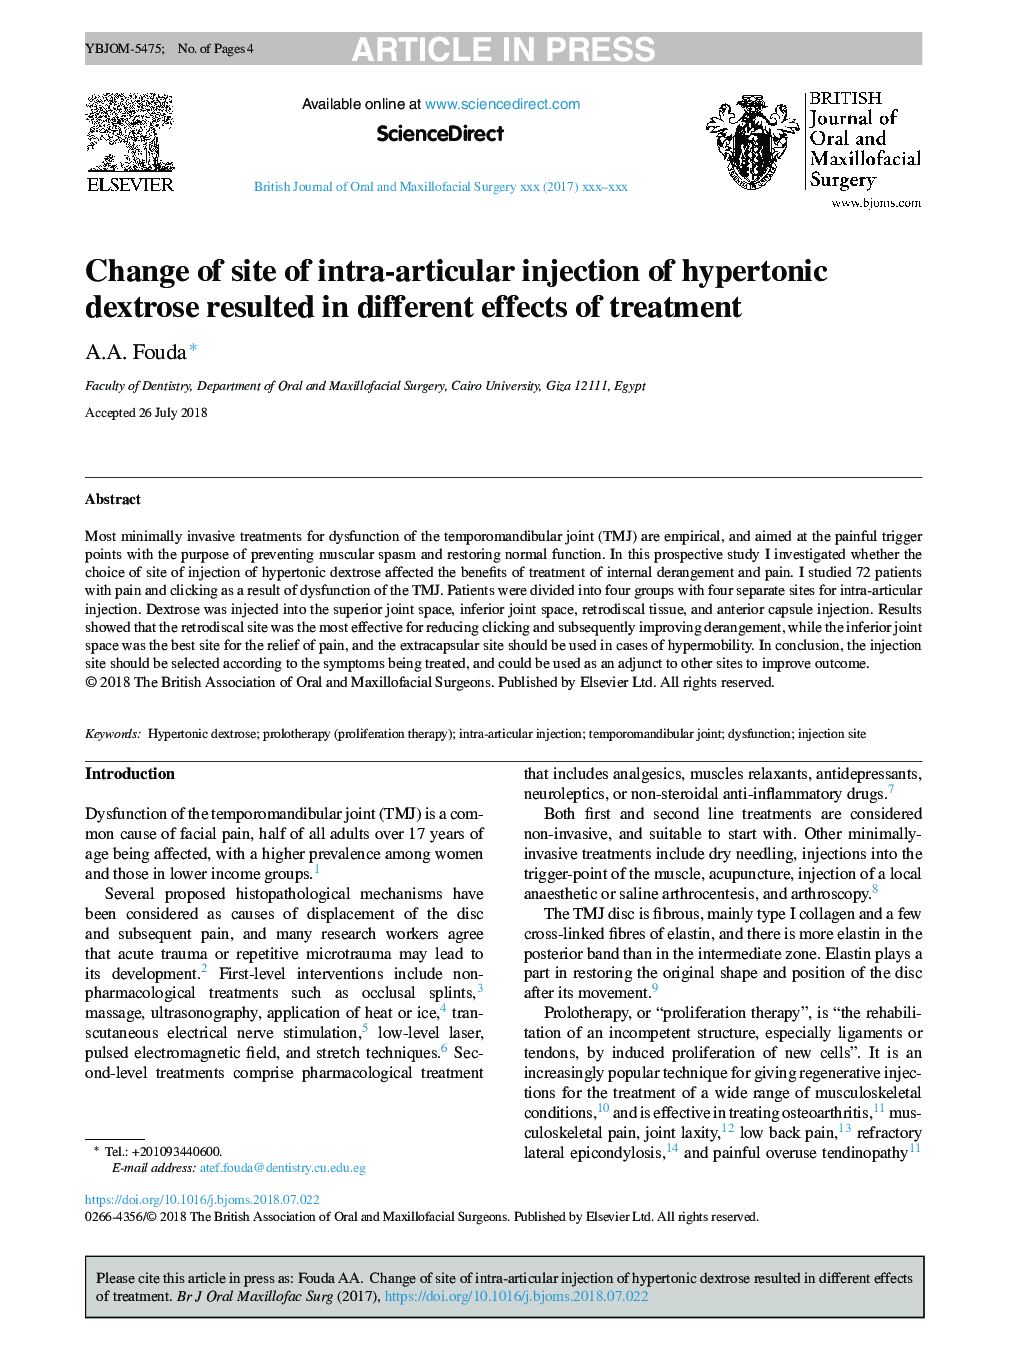 Change of site of intra-articular injection of hypertonic dextrose resulted in different effects of treatment